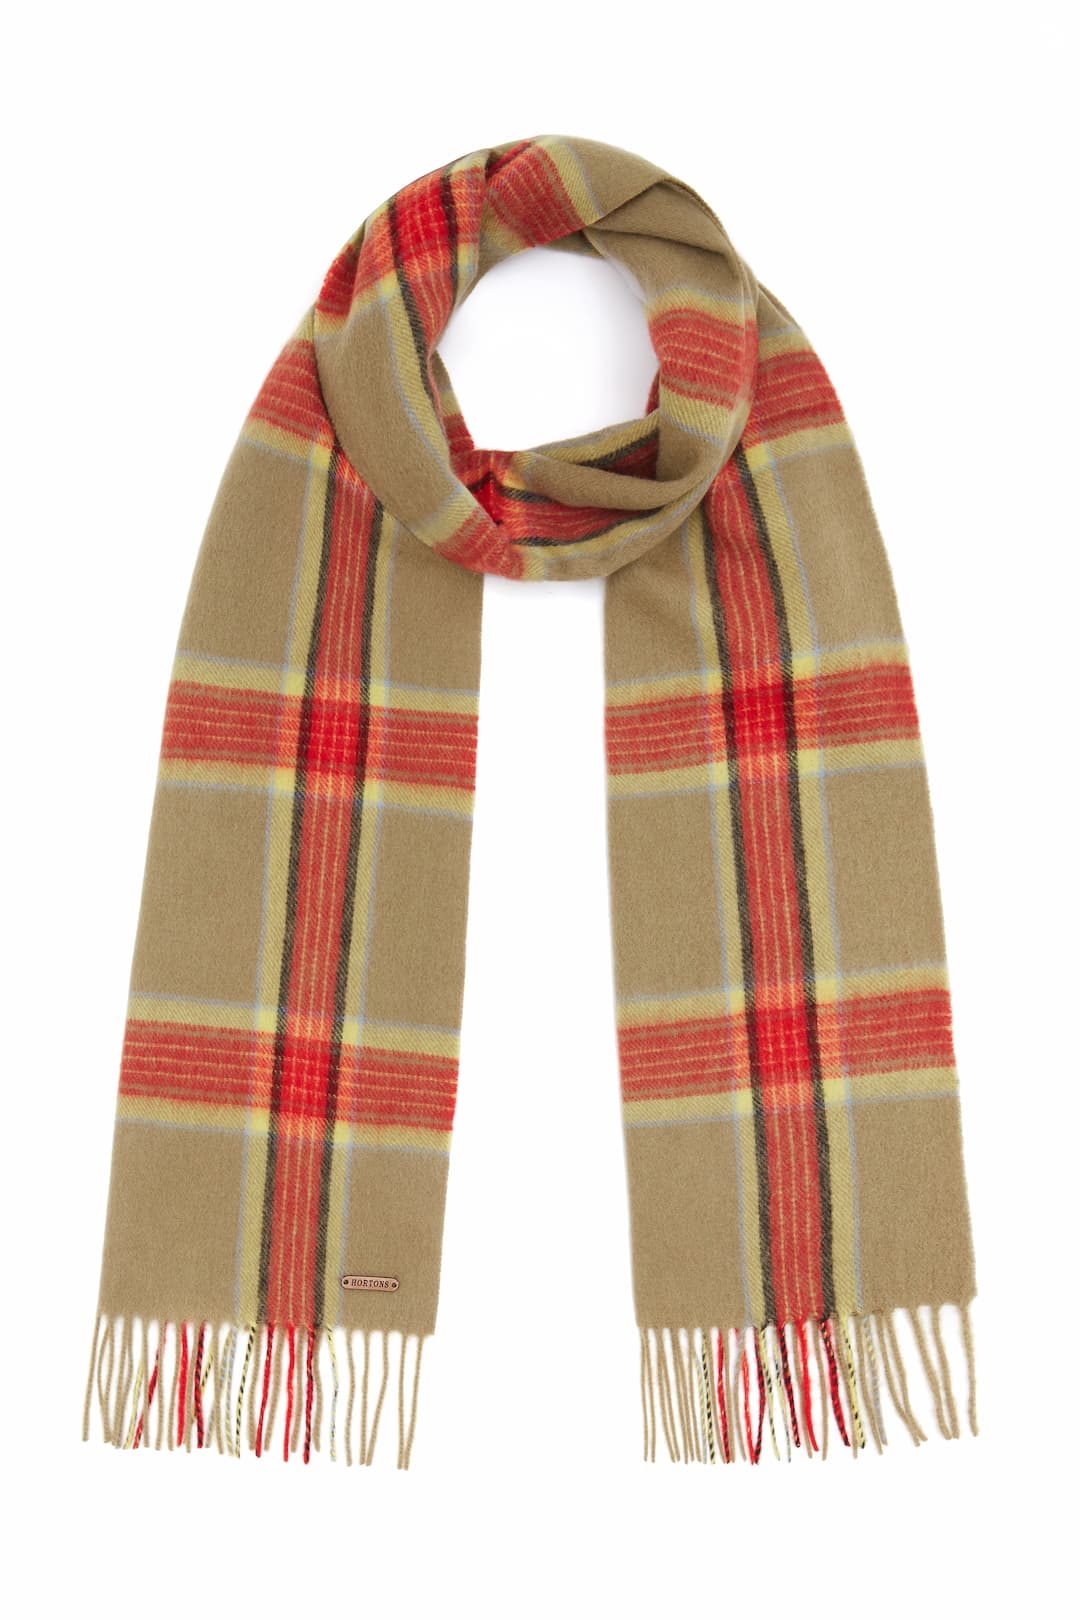 Hortons England - 100% Lambswool Checked Scarf - Red